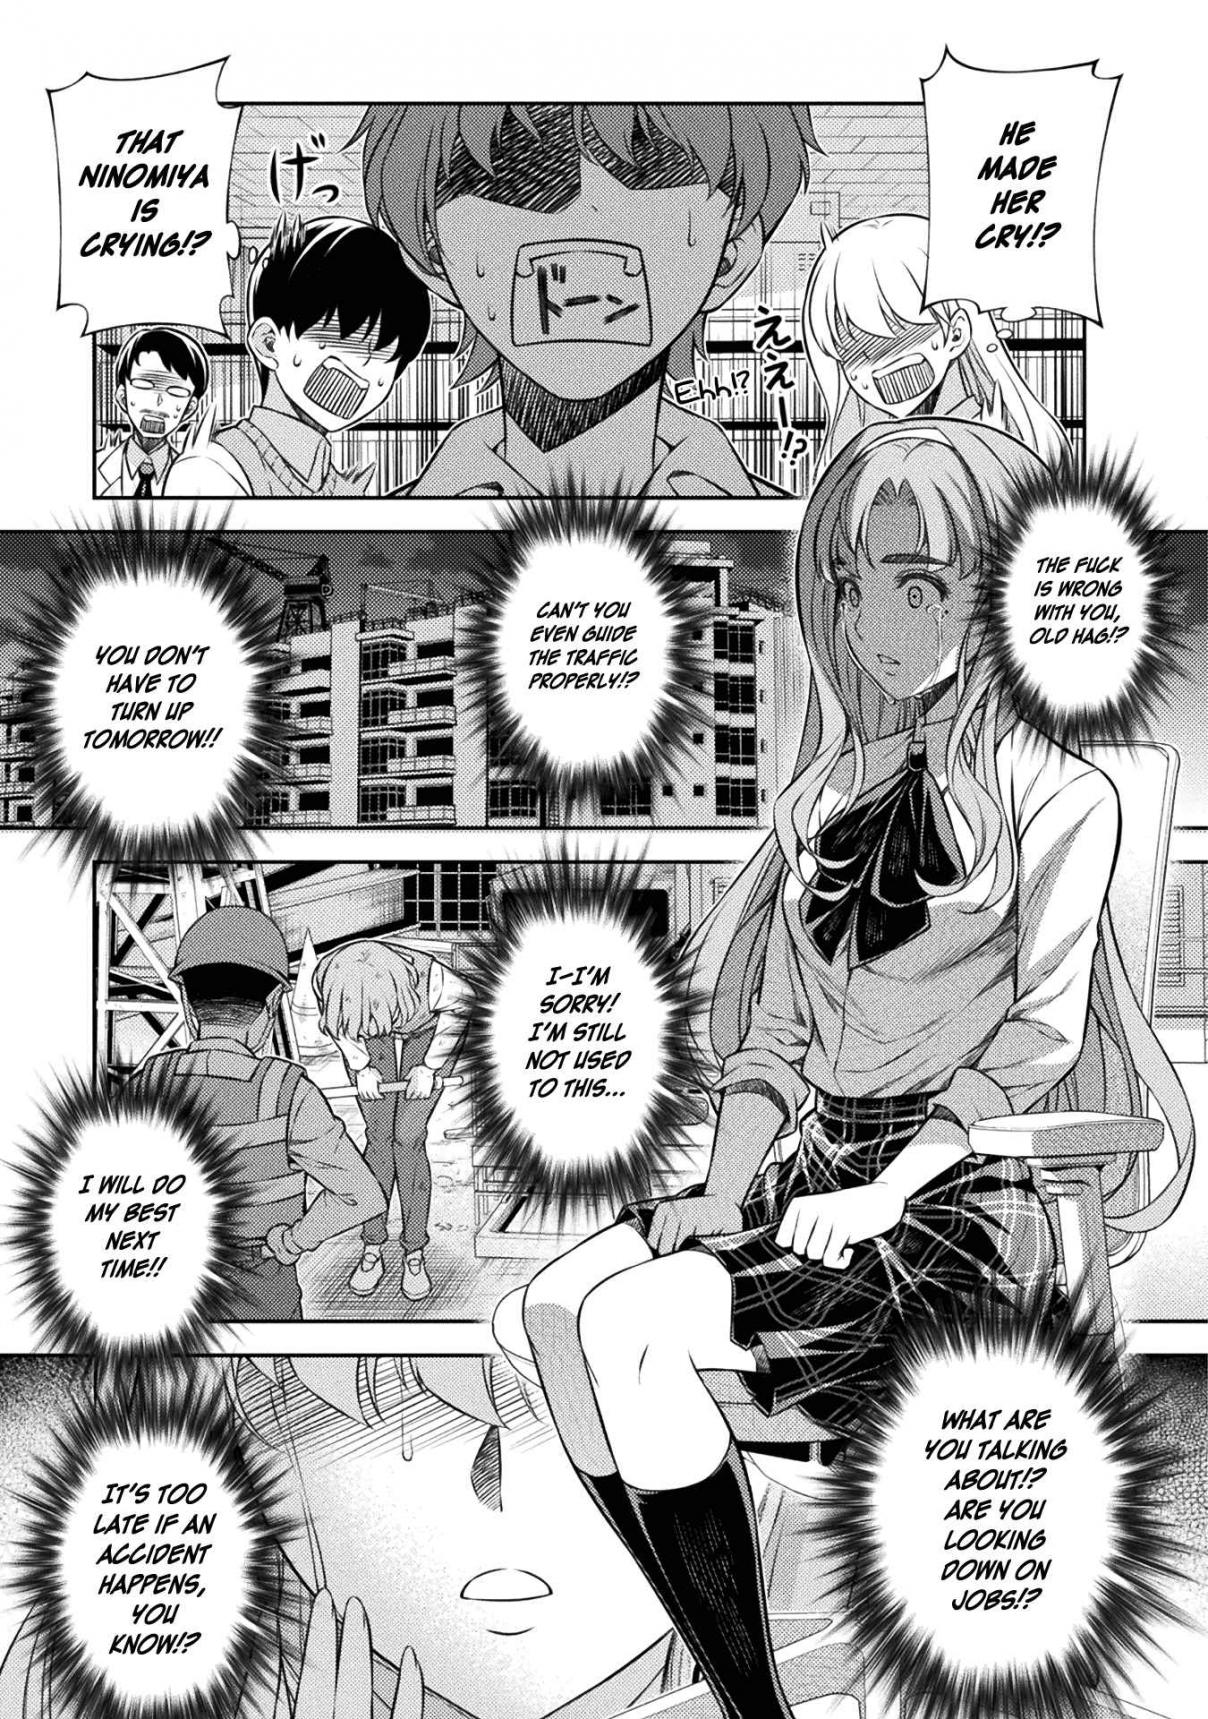 Silver Plan to Redo From JK Vol. 1 Ch. 3 I Want to be a Good Girl